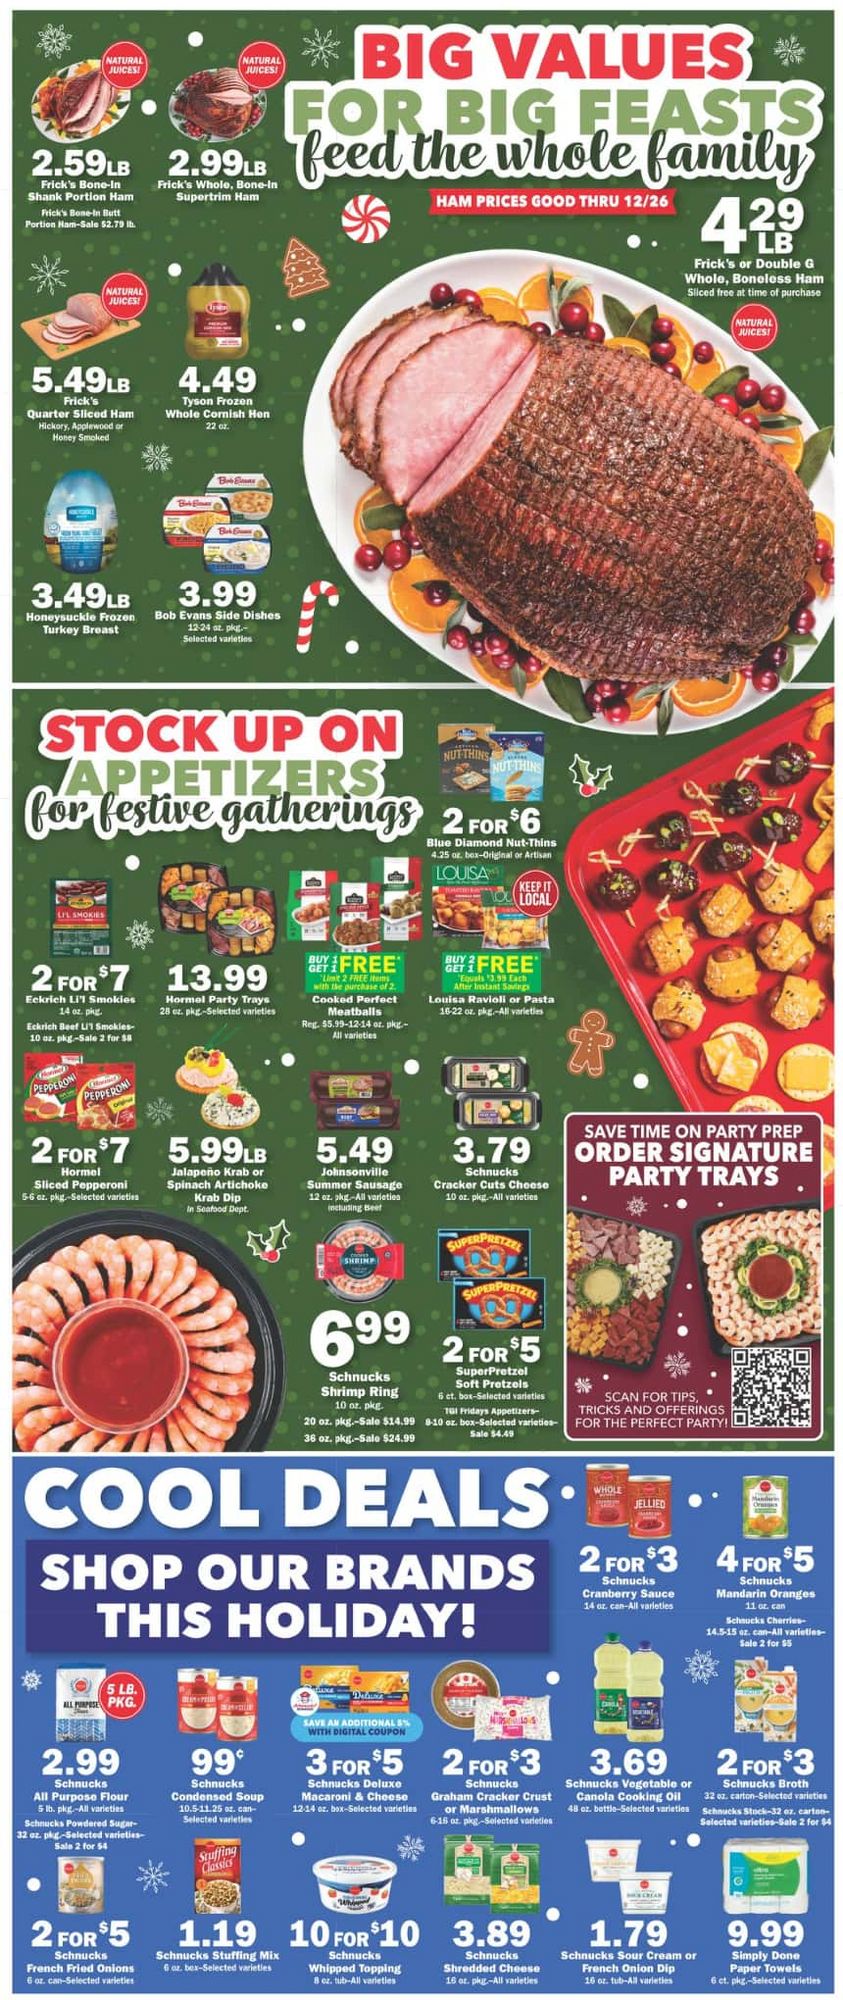 Schnucks Weekly July 2024 Weekly Sales, Deals, Discounts and Digital Coupons.